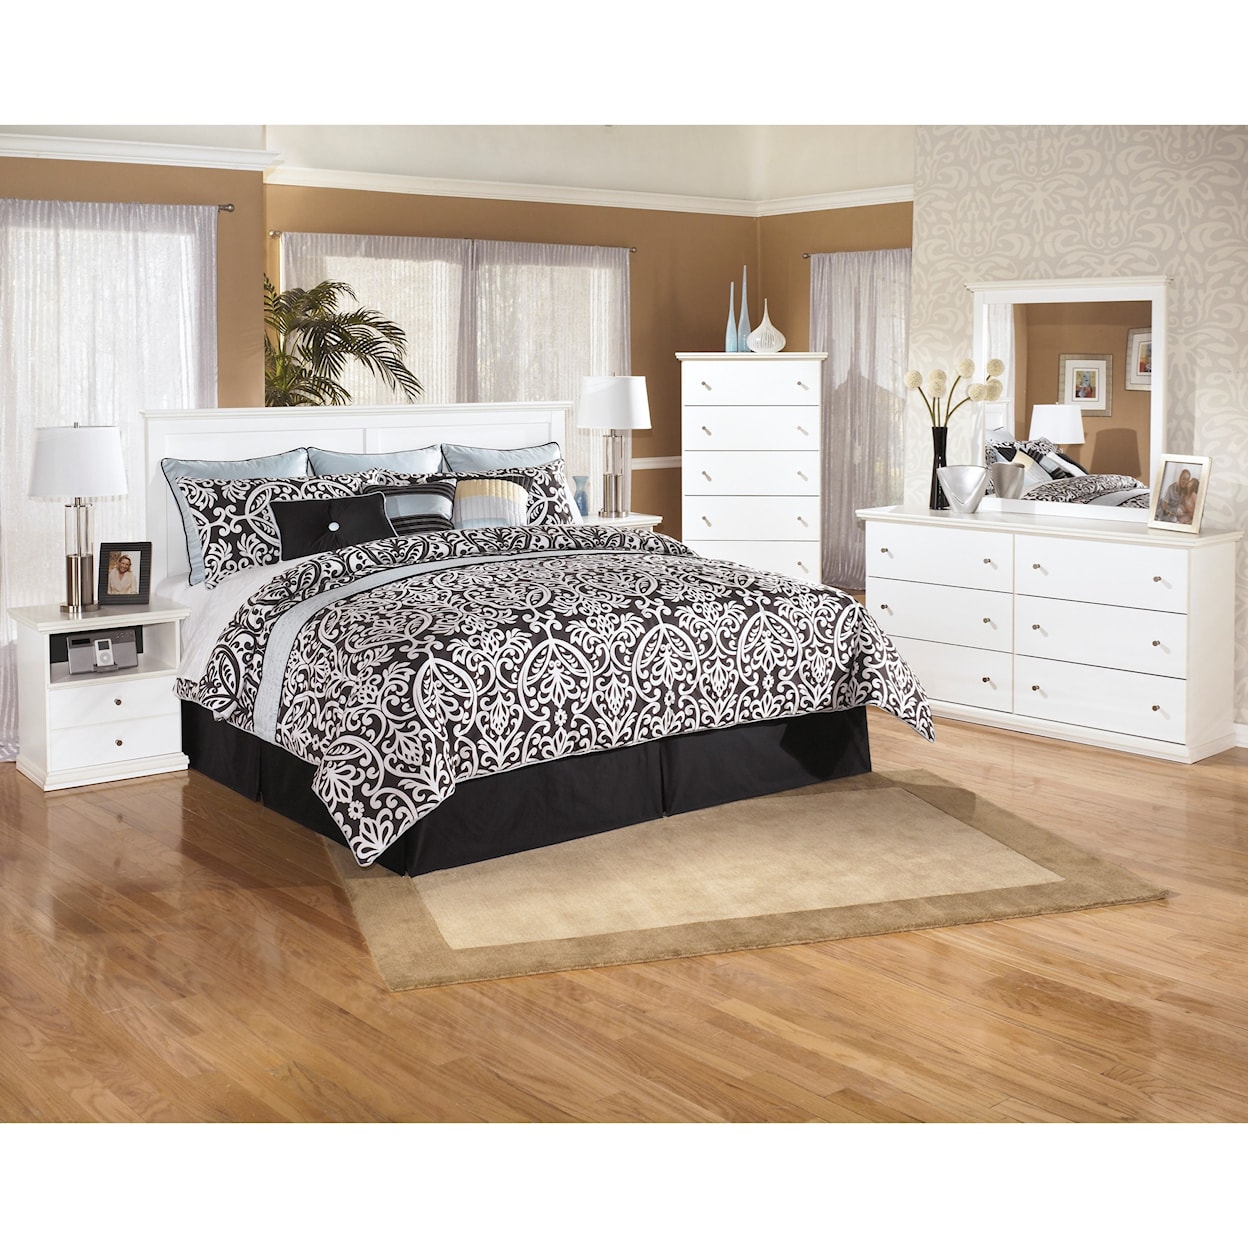 Signature Design by Ashley Furniture Bostwick Shoals King Bedroom Group